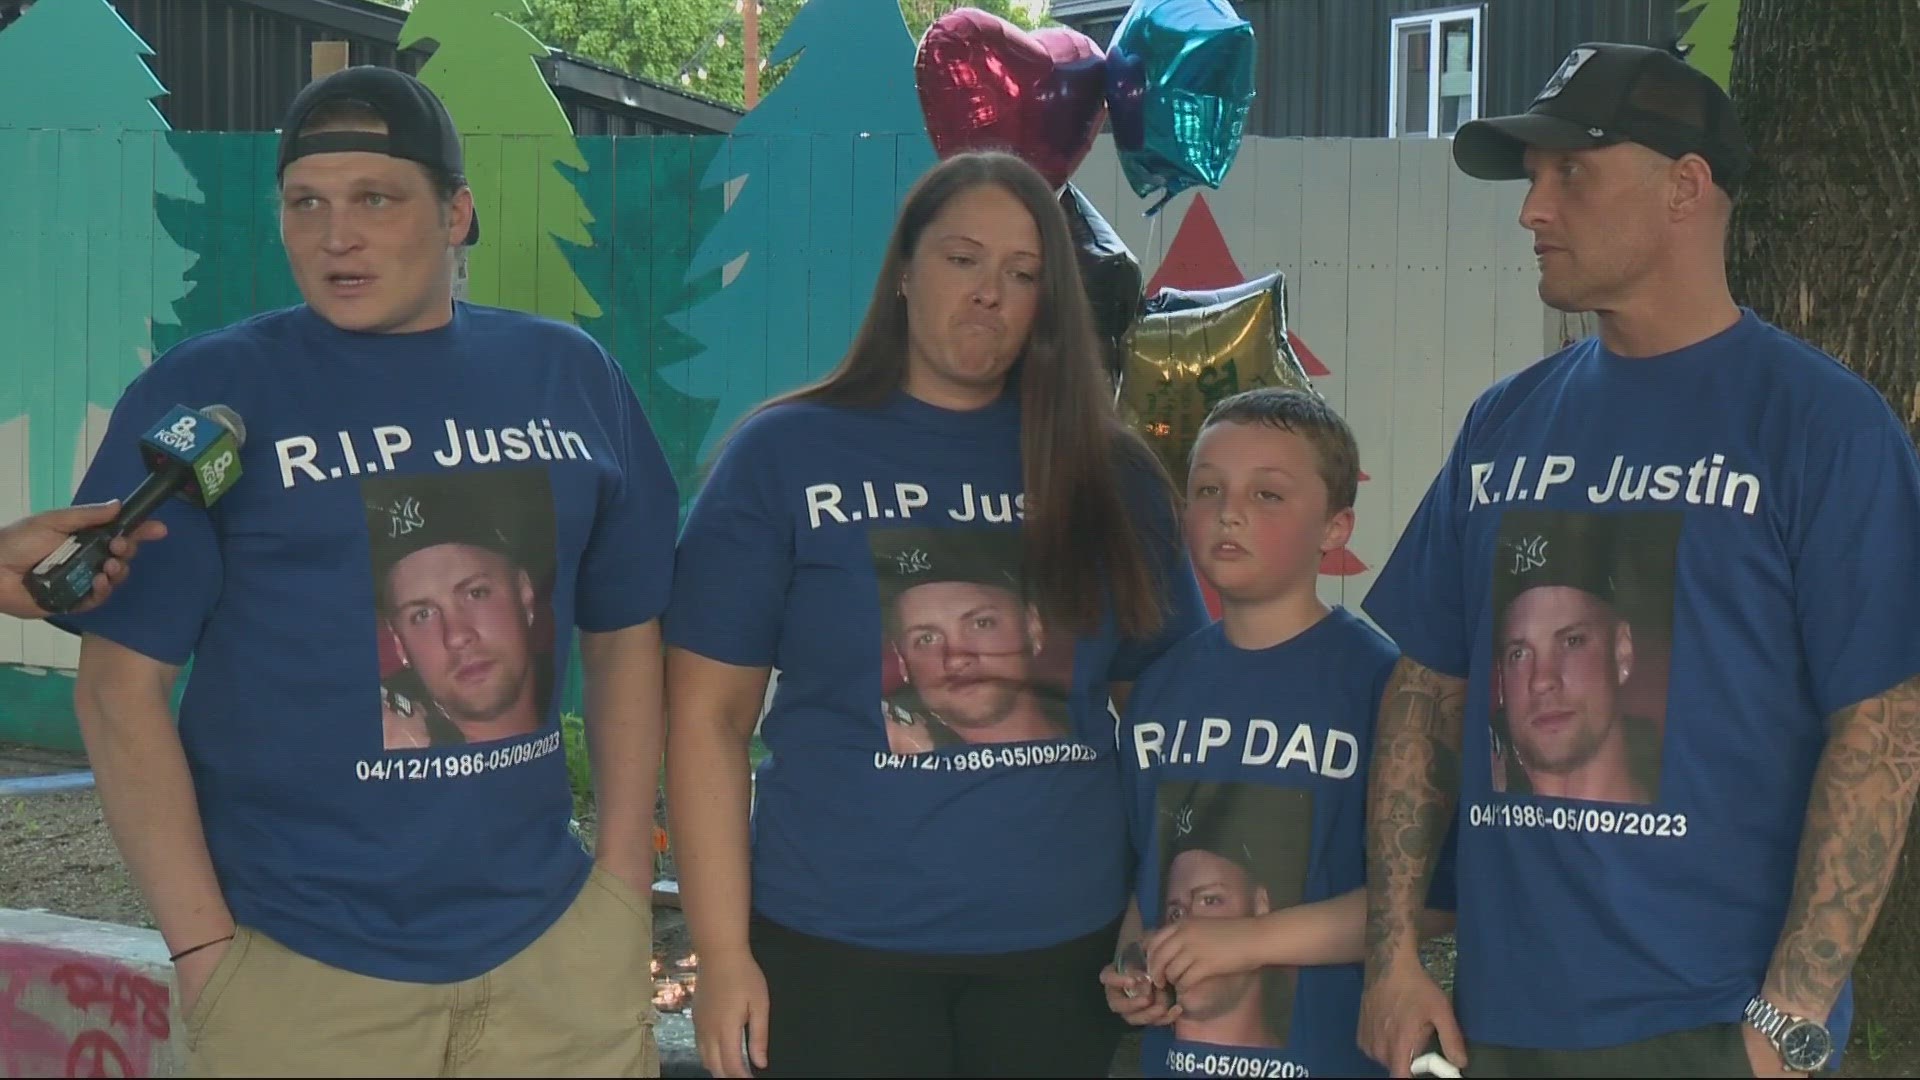 Police identified the victim of the May 9 shooting as Justin Joki, who leaves behind a nine-year-old son.